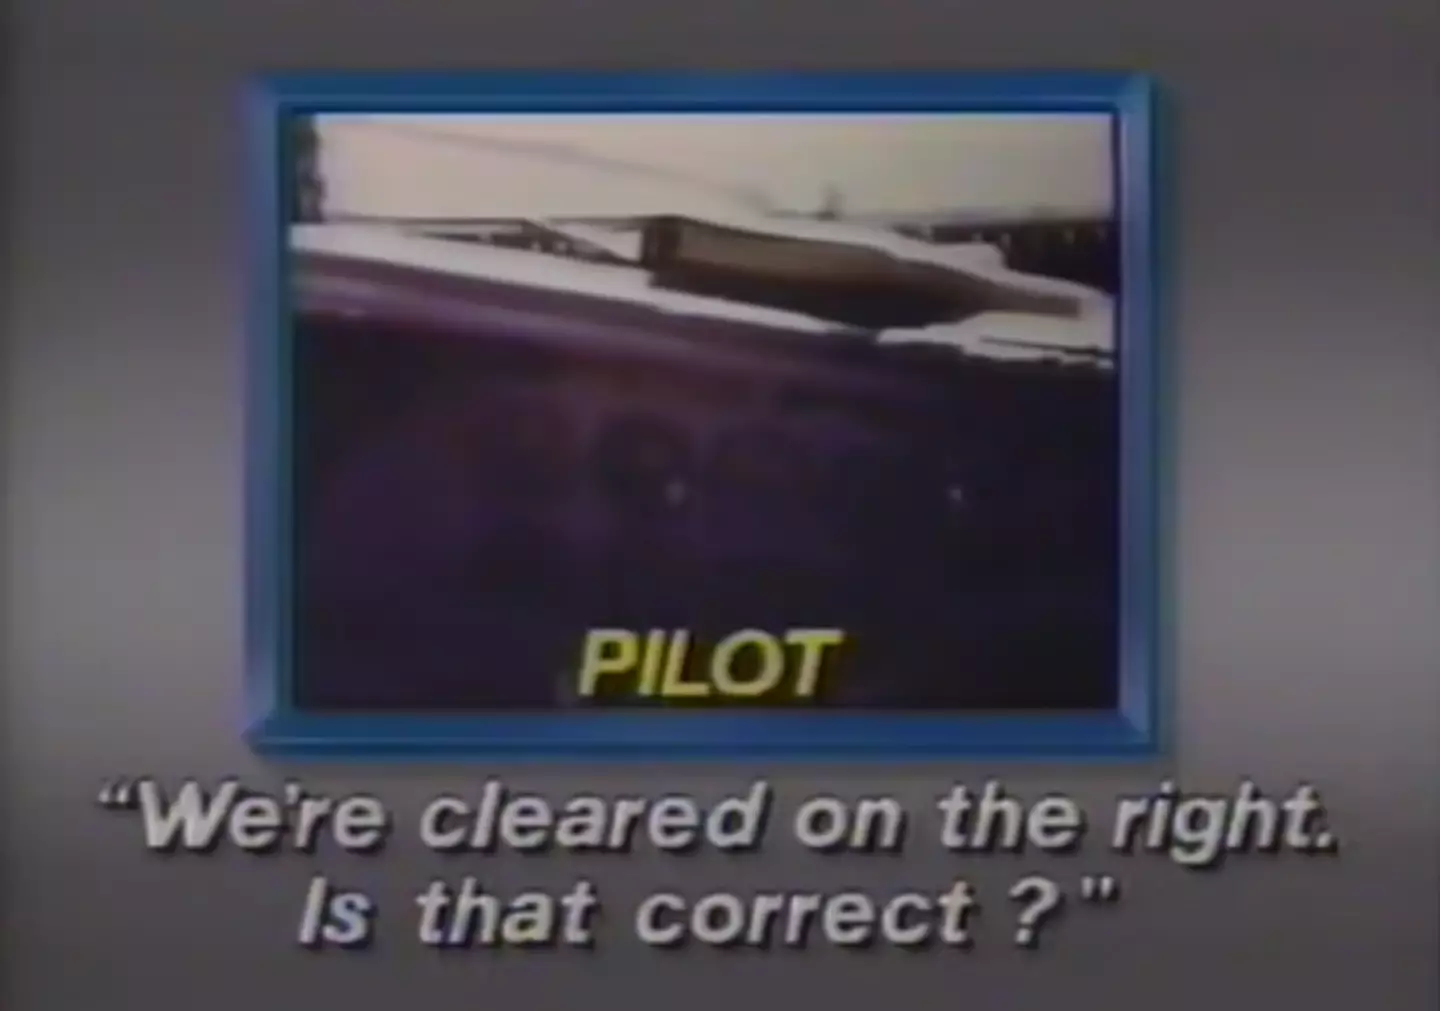 The cockpit recordings of the flight are harrowing.